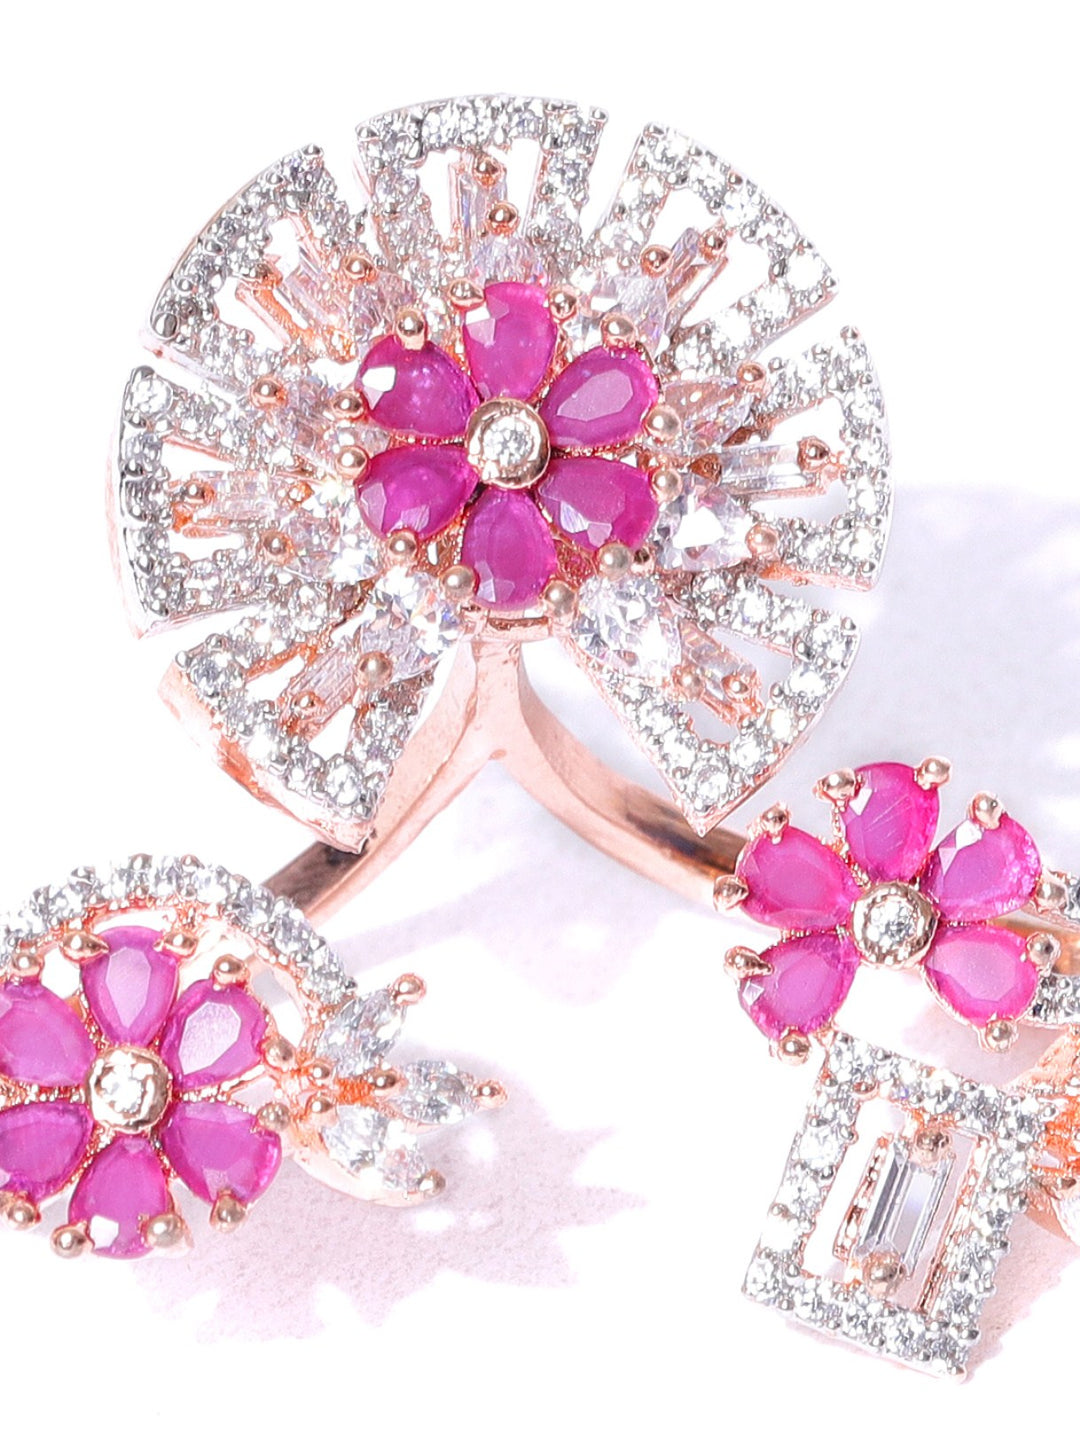 Stylish Gold-Toned Pink And White CZ Stone-Studded Double Finger Adjustable Rings